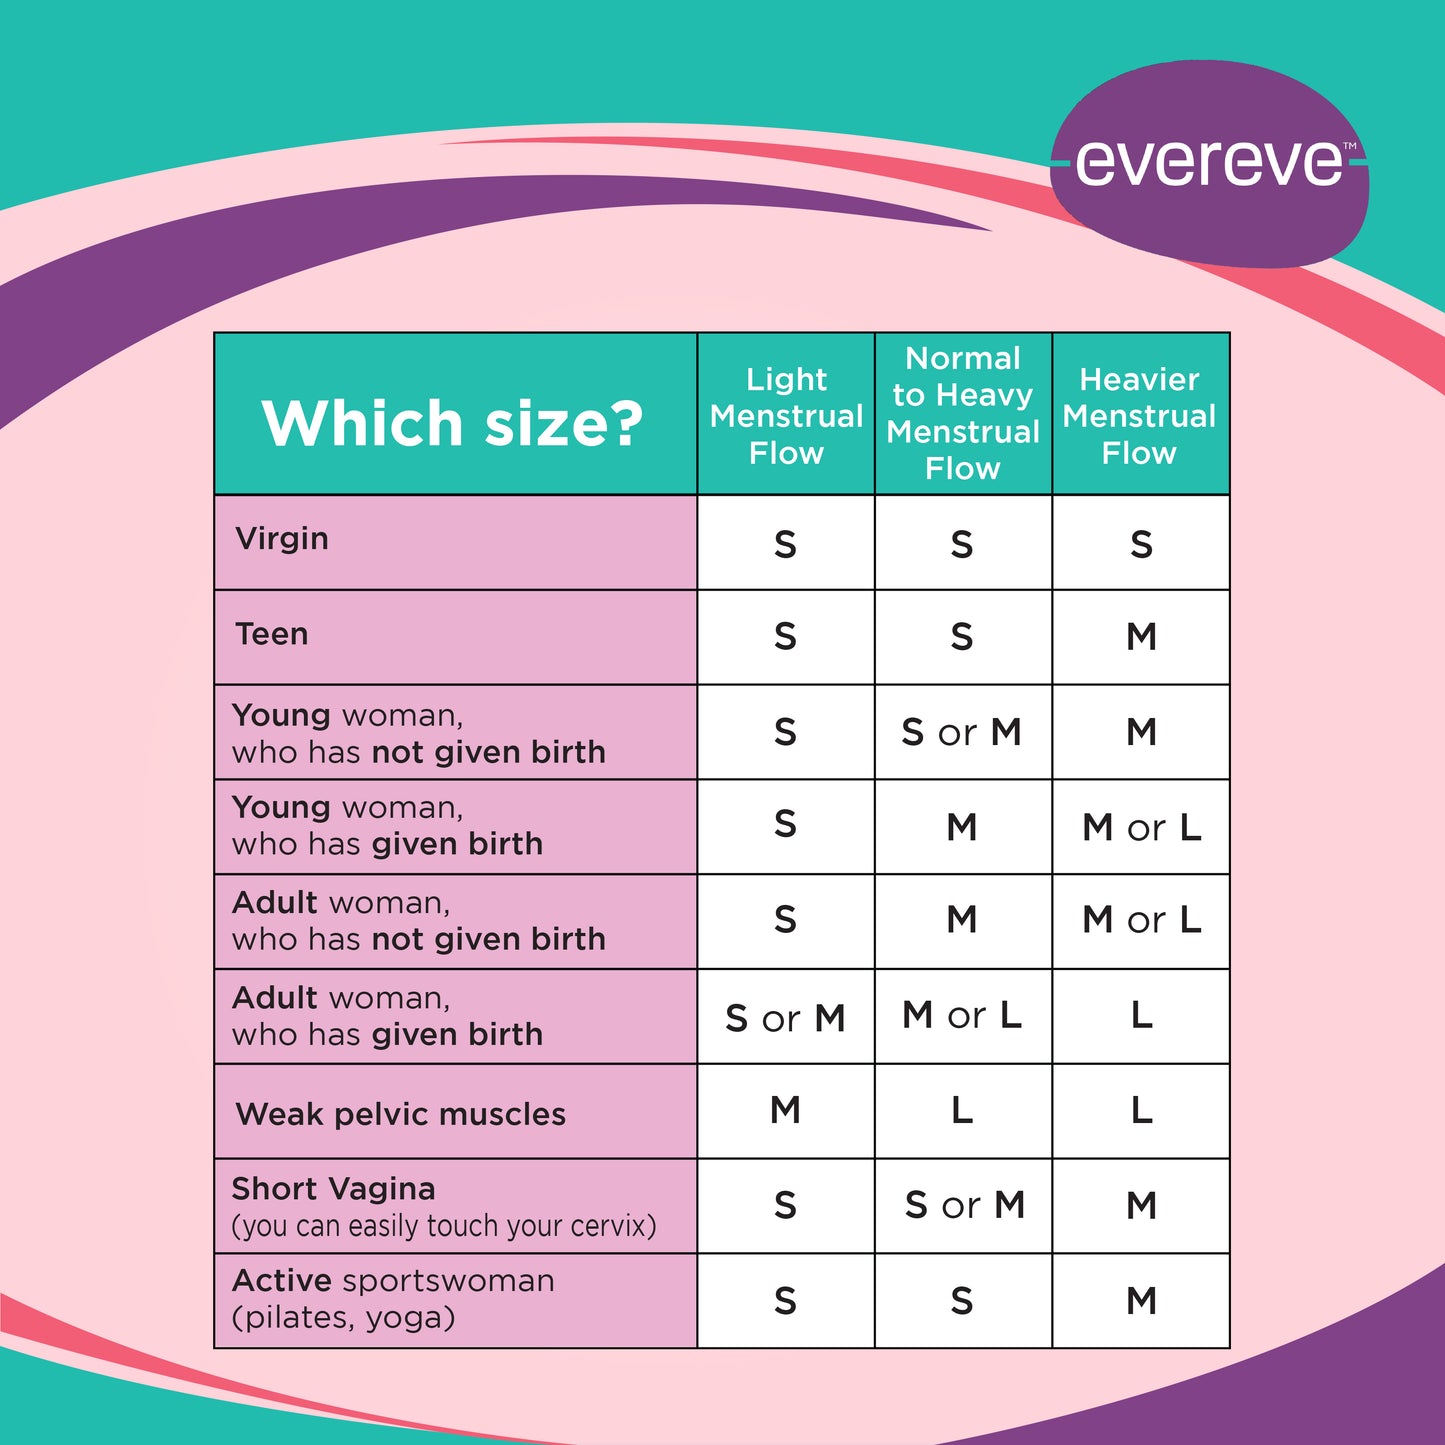 Evereve Menstrual Cup for Women, Small Size, 1 Pc,Pink